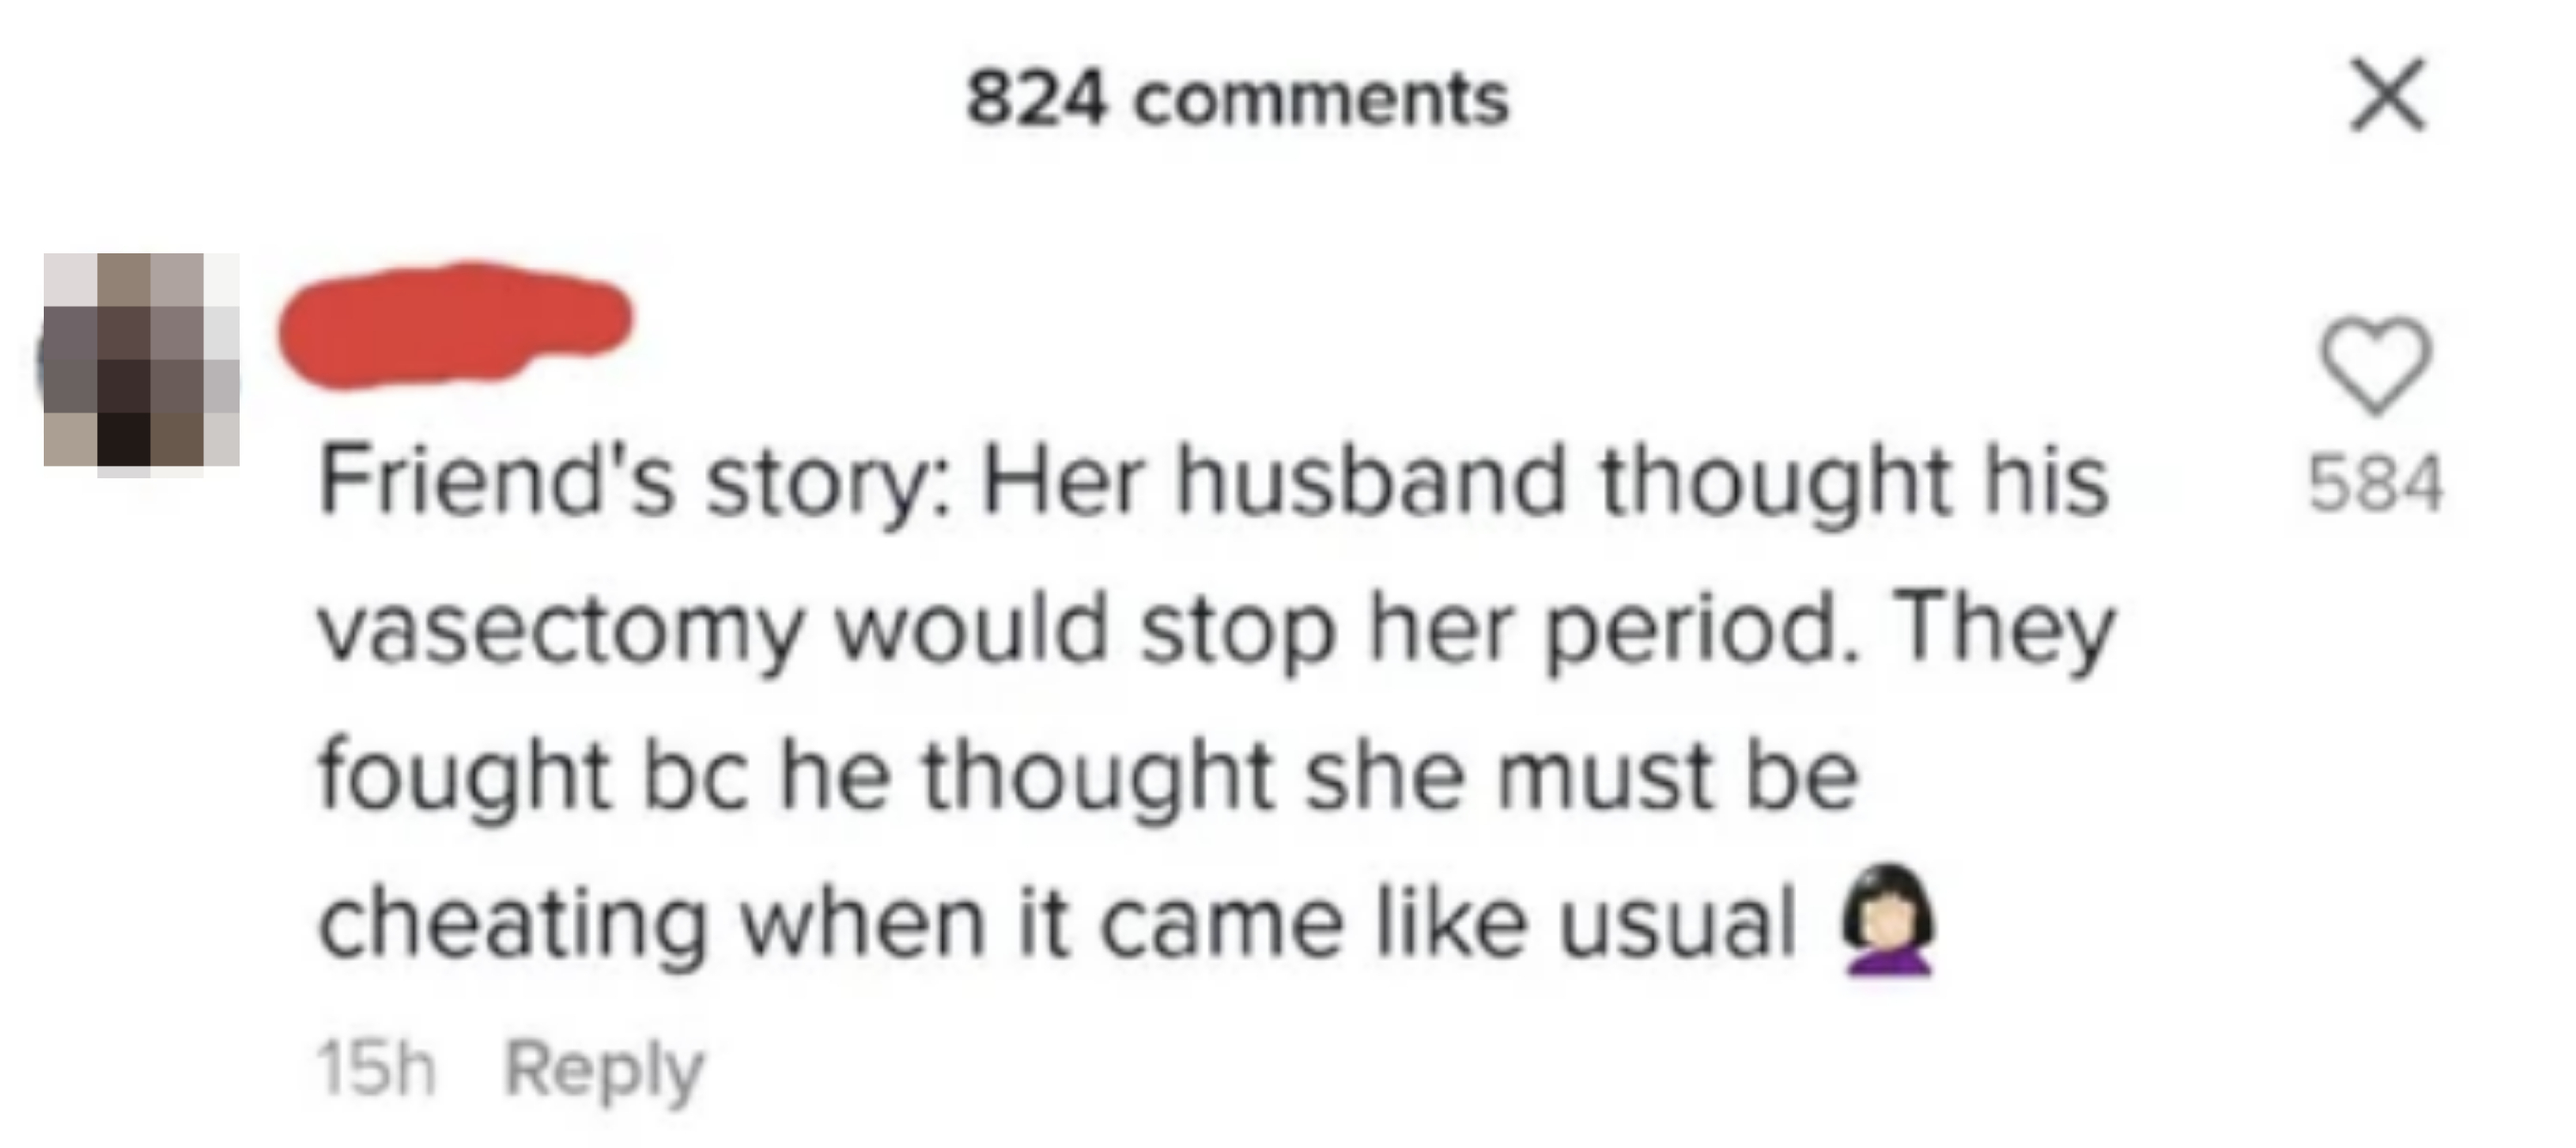 husband though his vasectomy would stop her period they fought because he thought she must be cheating when it came like usual